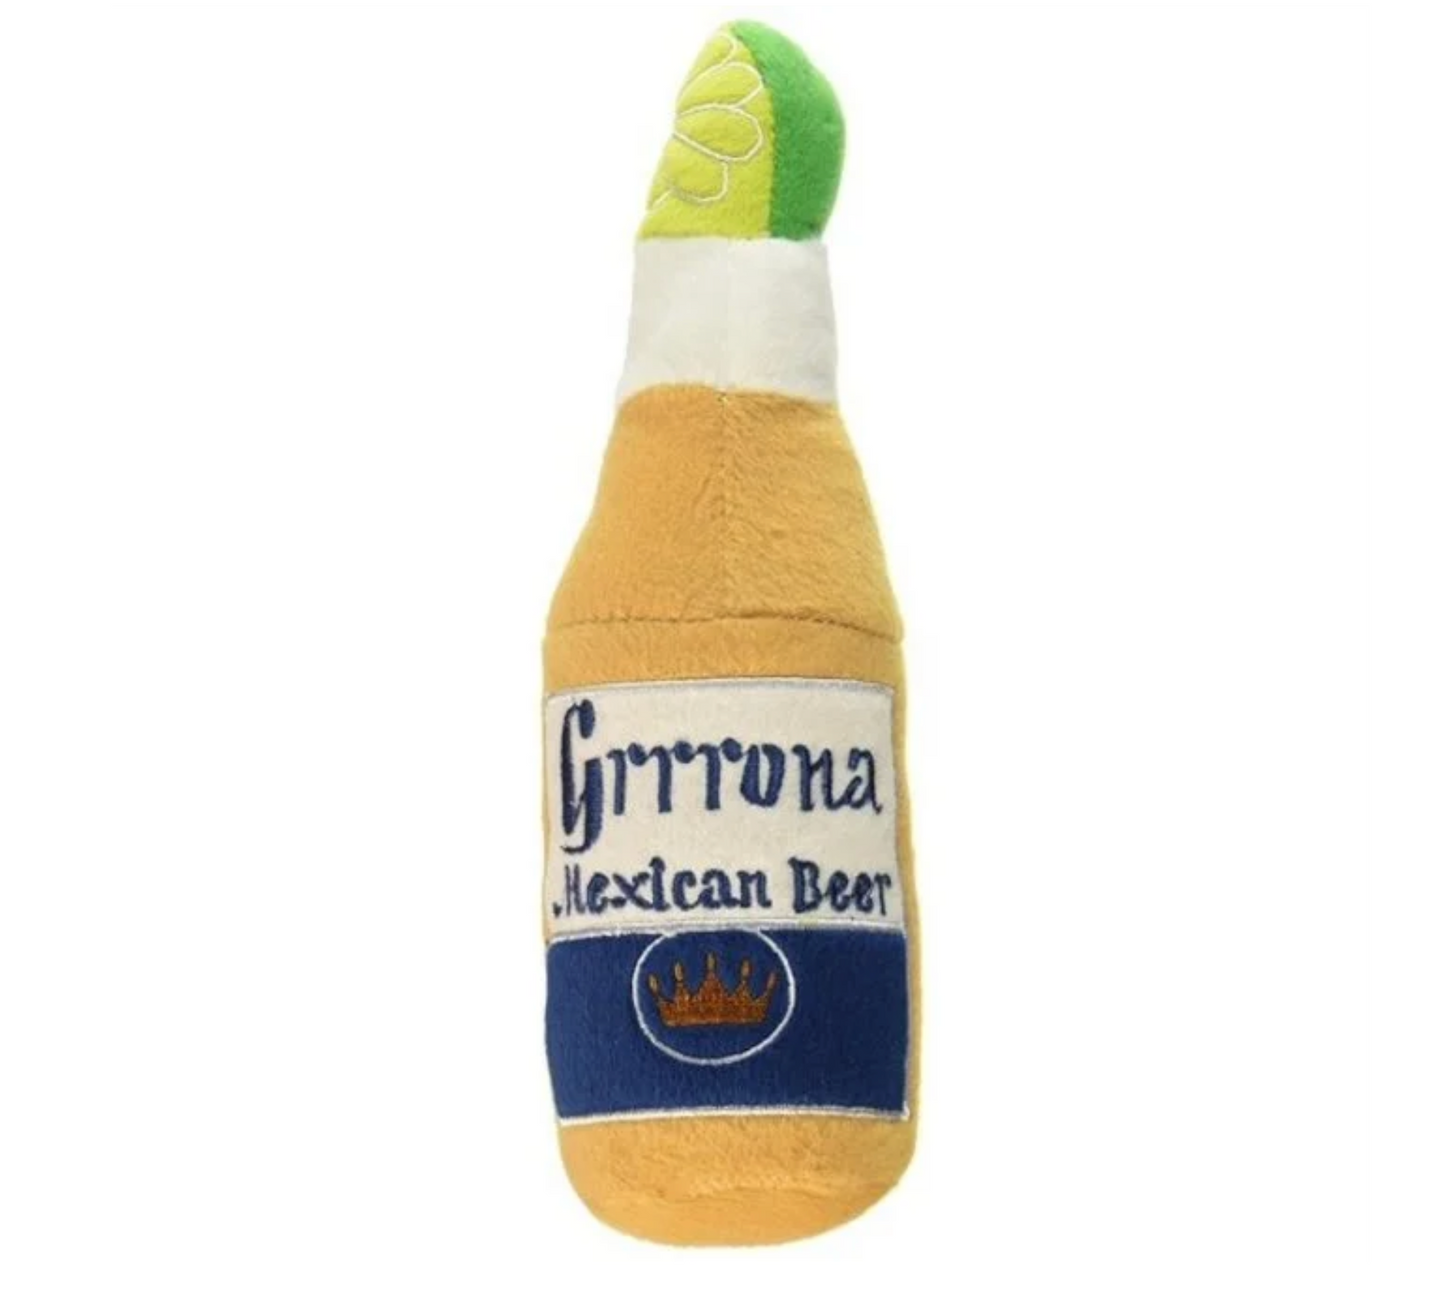 Grrrona Mexican Beer | Plush Toy